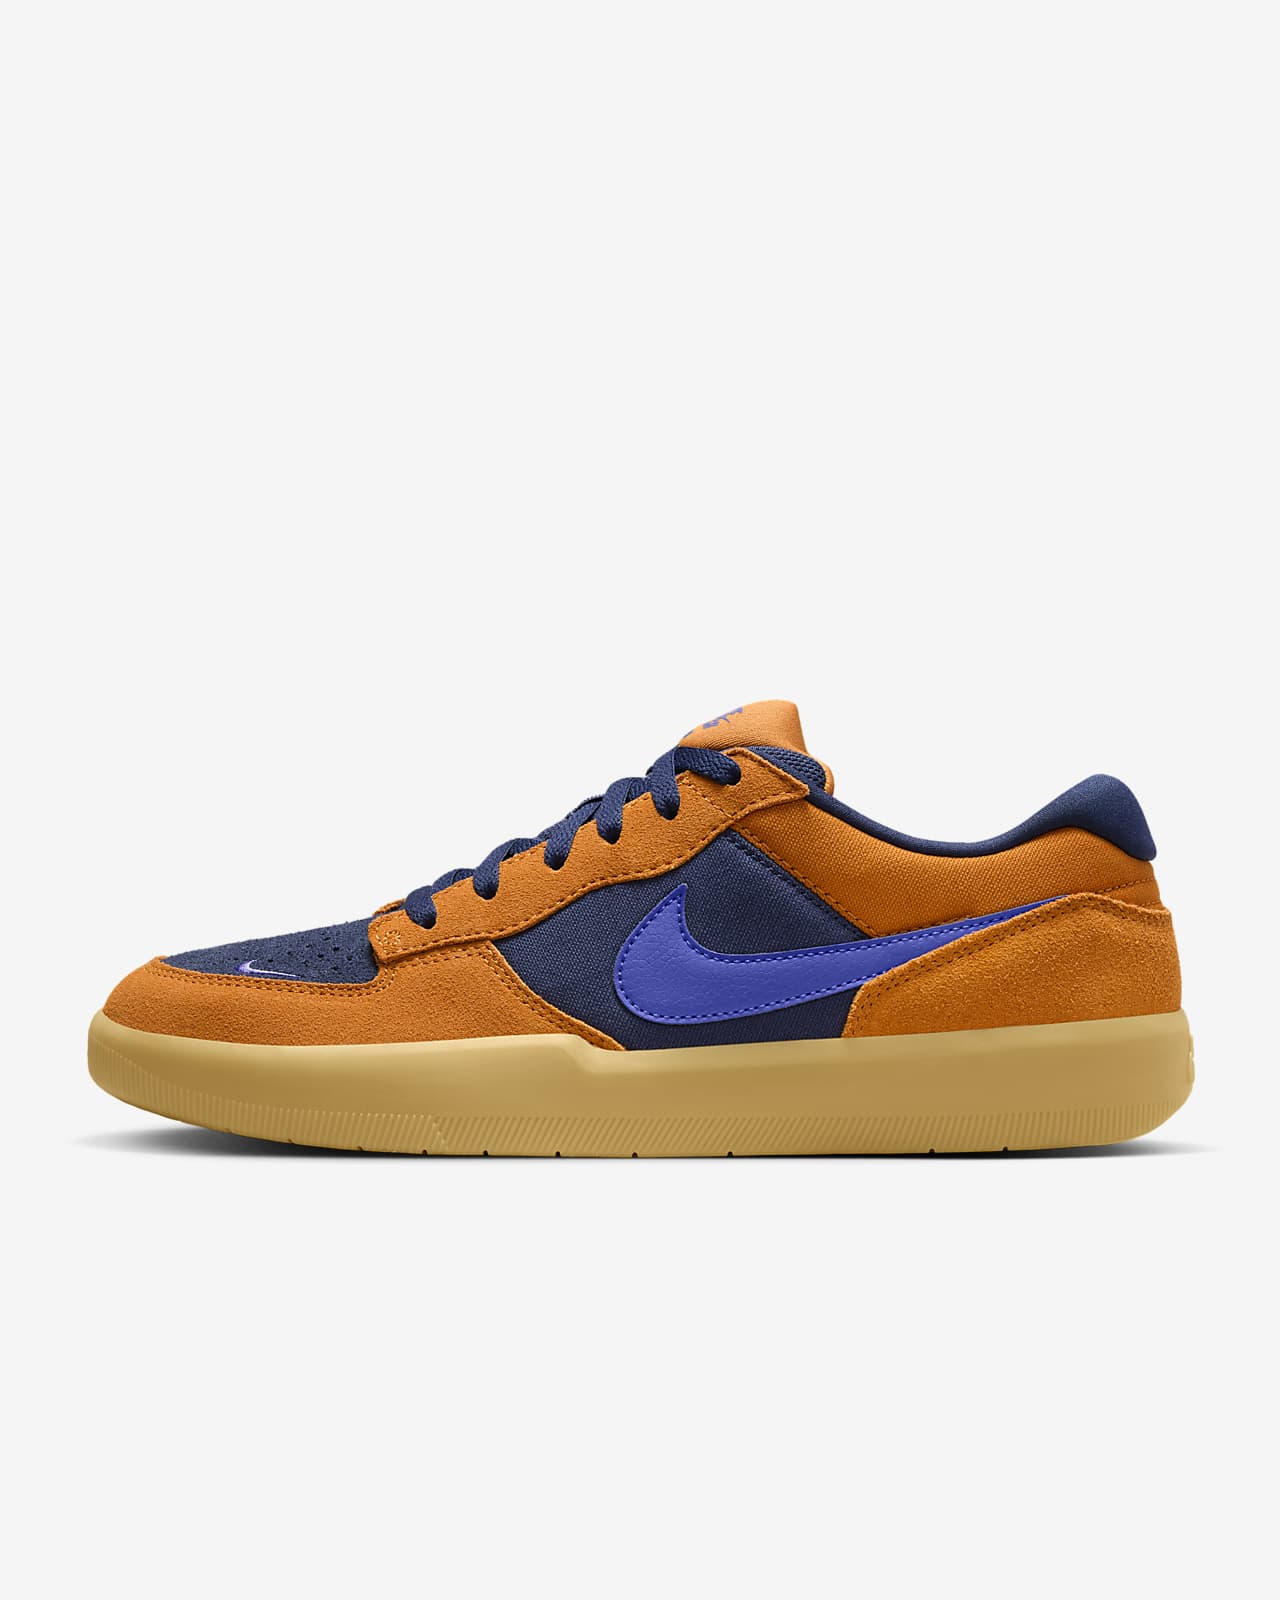 Nike SB Force 58 Shoes - Monarch/Persian Violet/Midnight Navy